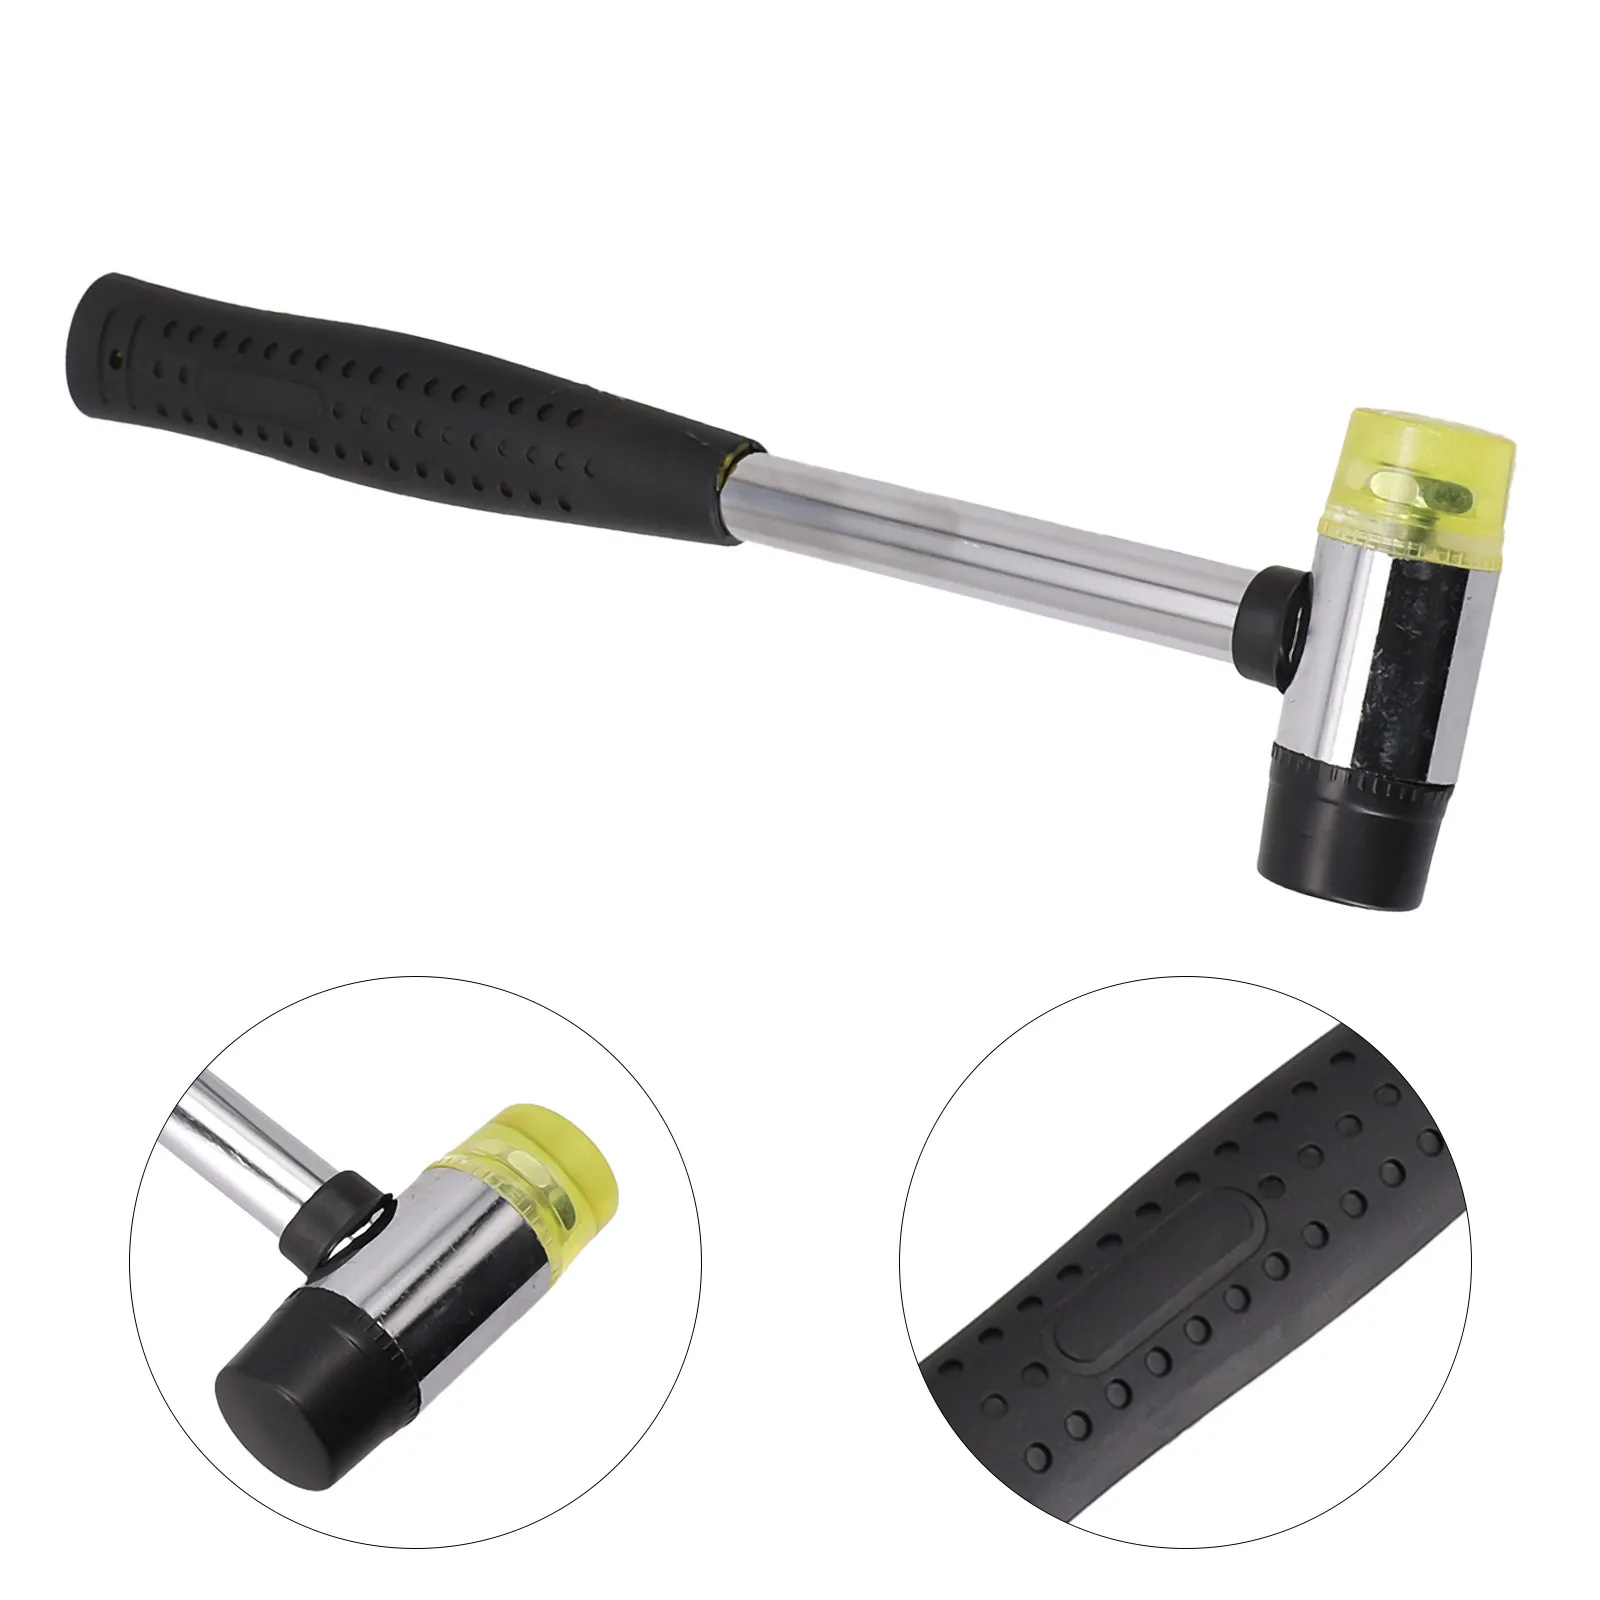 

25mm Mini Hammer Double Faced Household Rubber Hammers Multifunctional Domestic Head Mallet Hand Tool For Jewelry/Craft/DIY